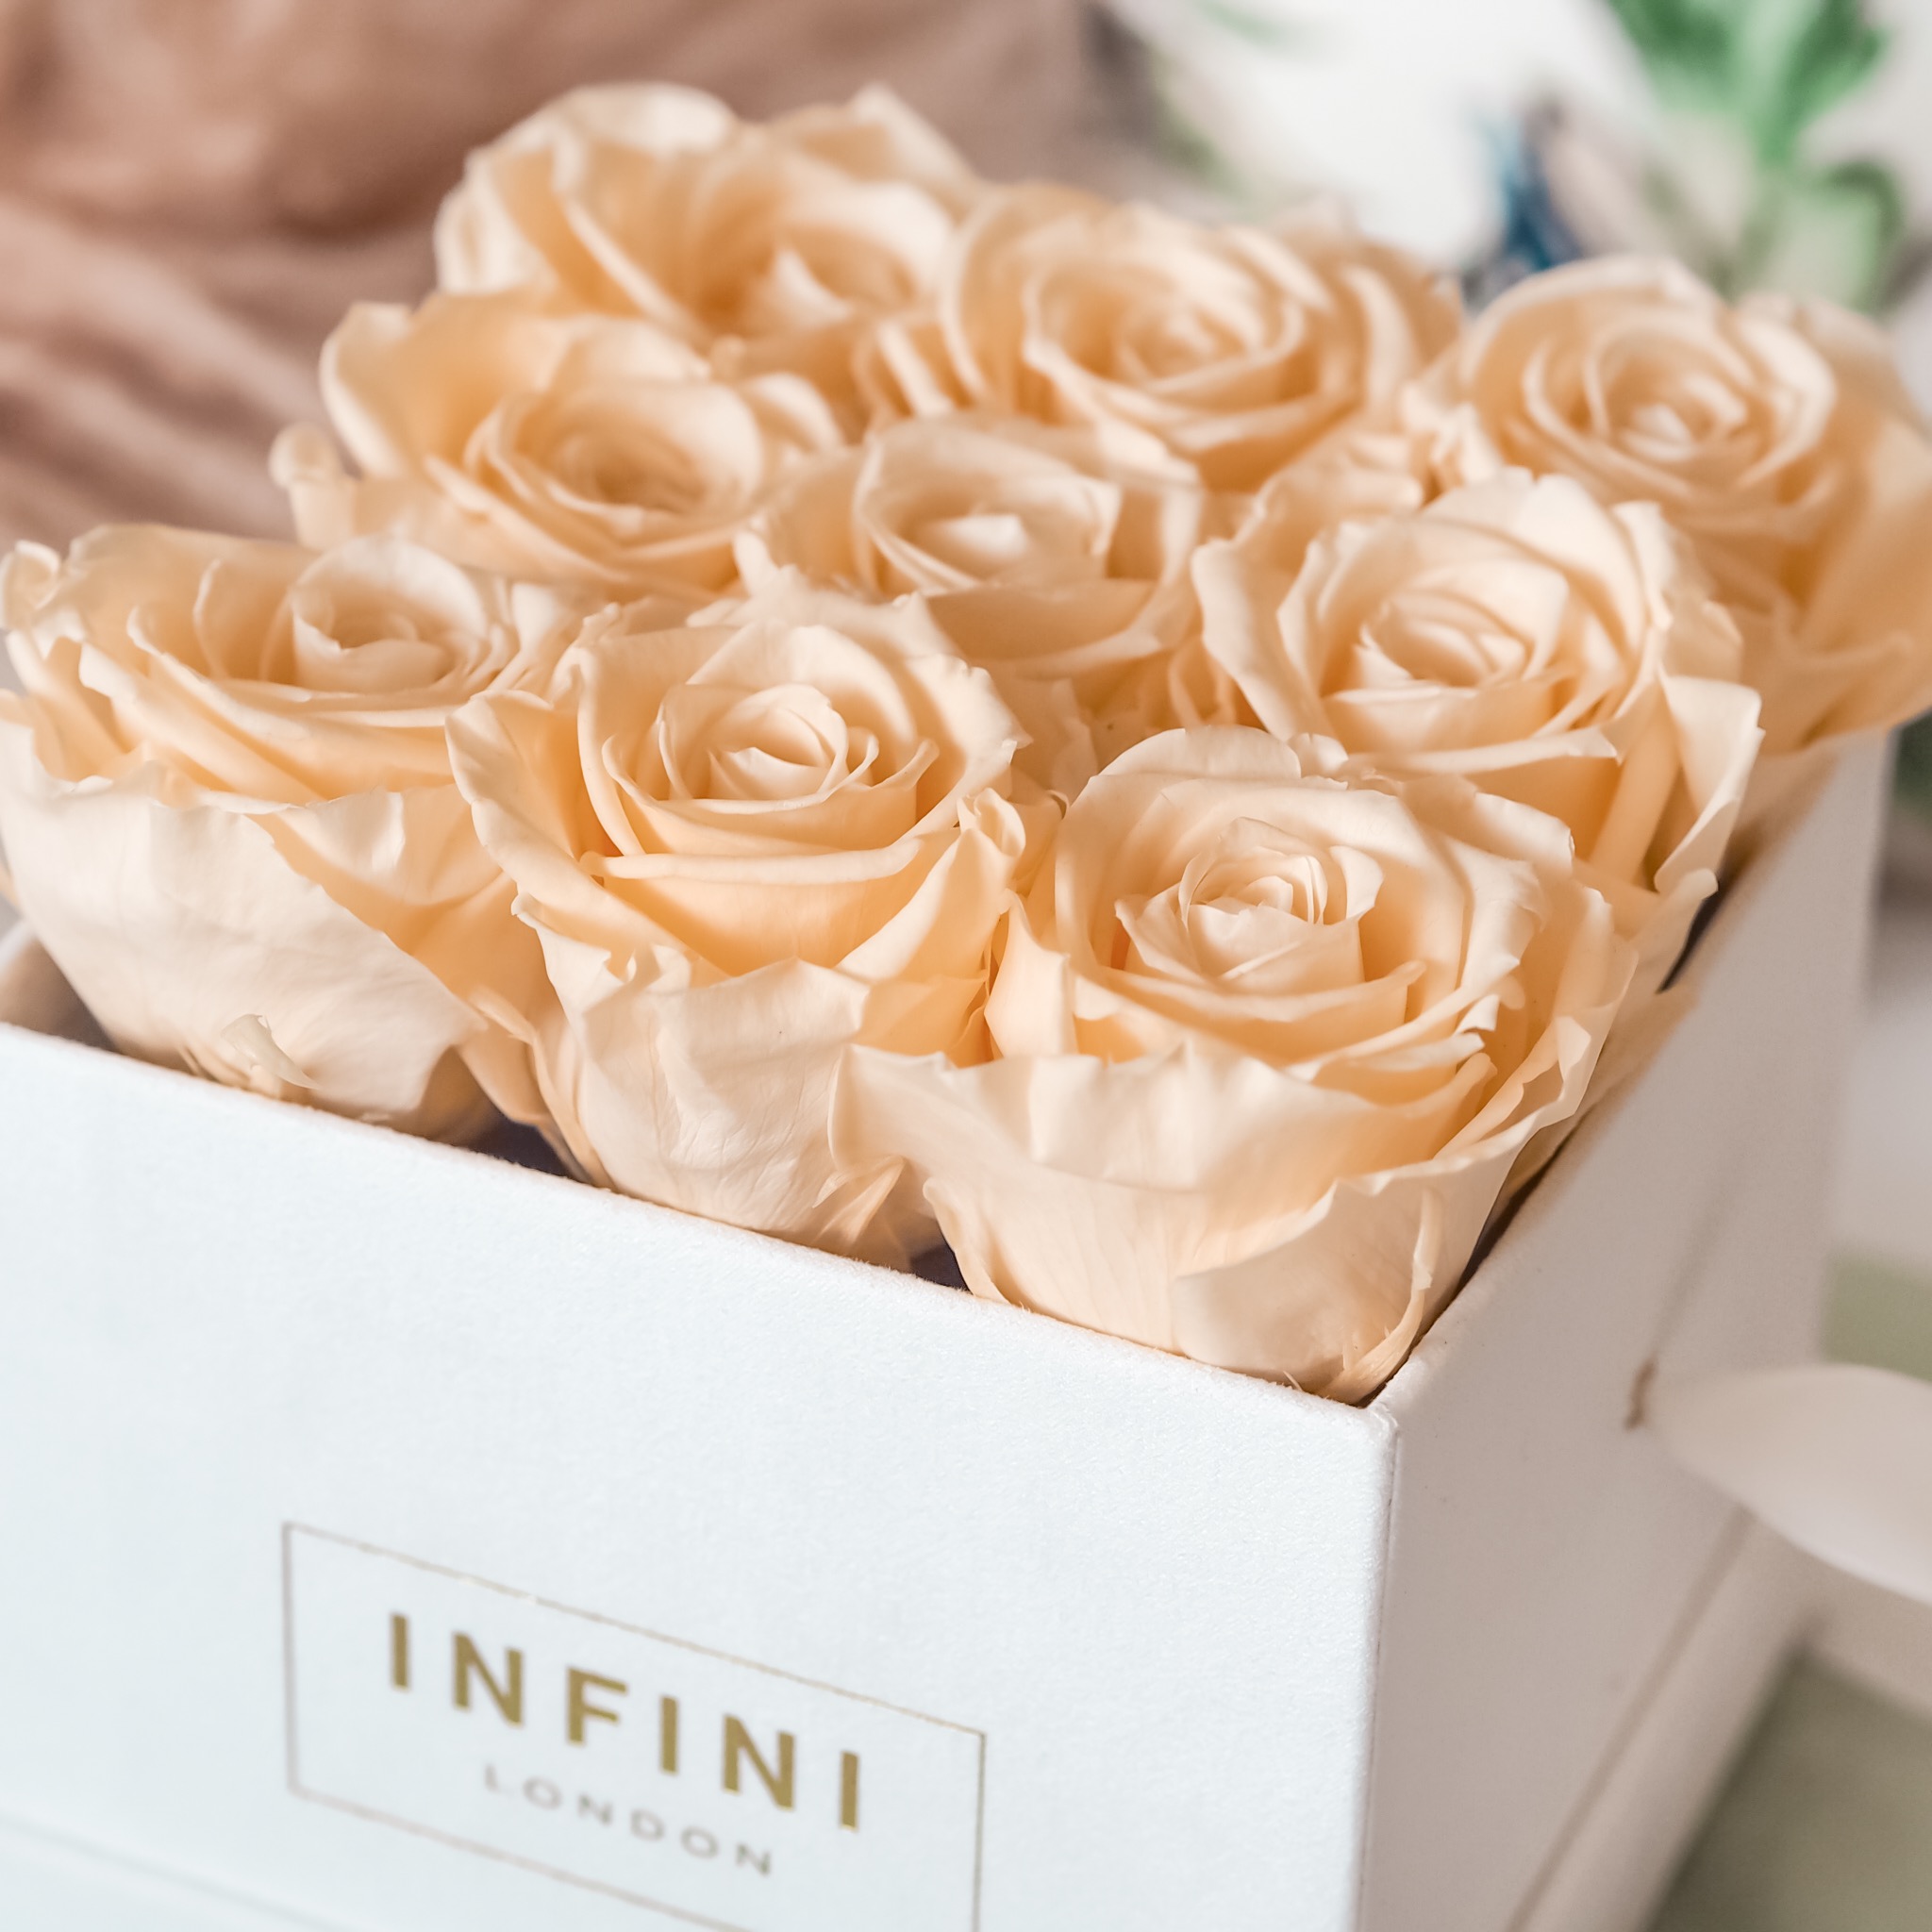 Infini Roses | roses that last a year | roses that don't need water | roses that last years | flowers that don't need water or feed | roses that last for years